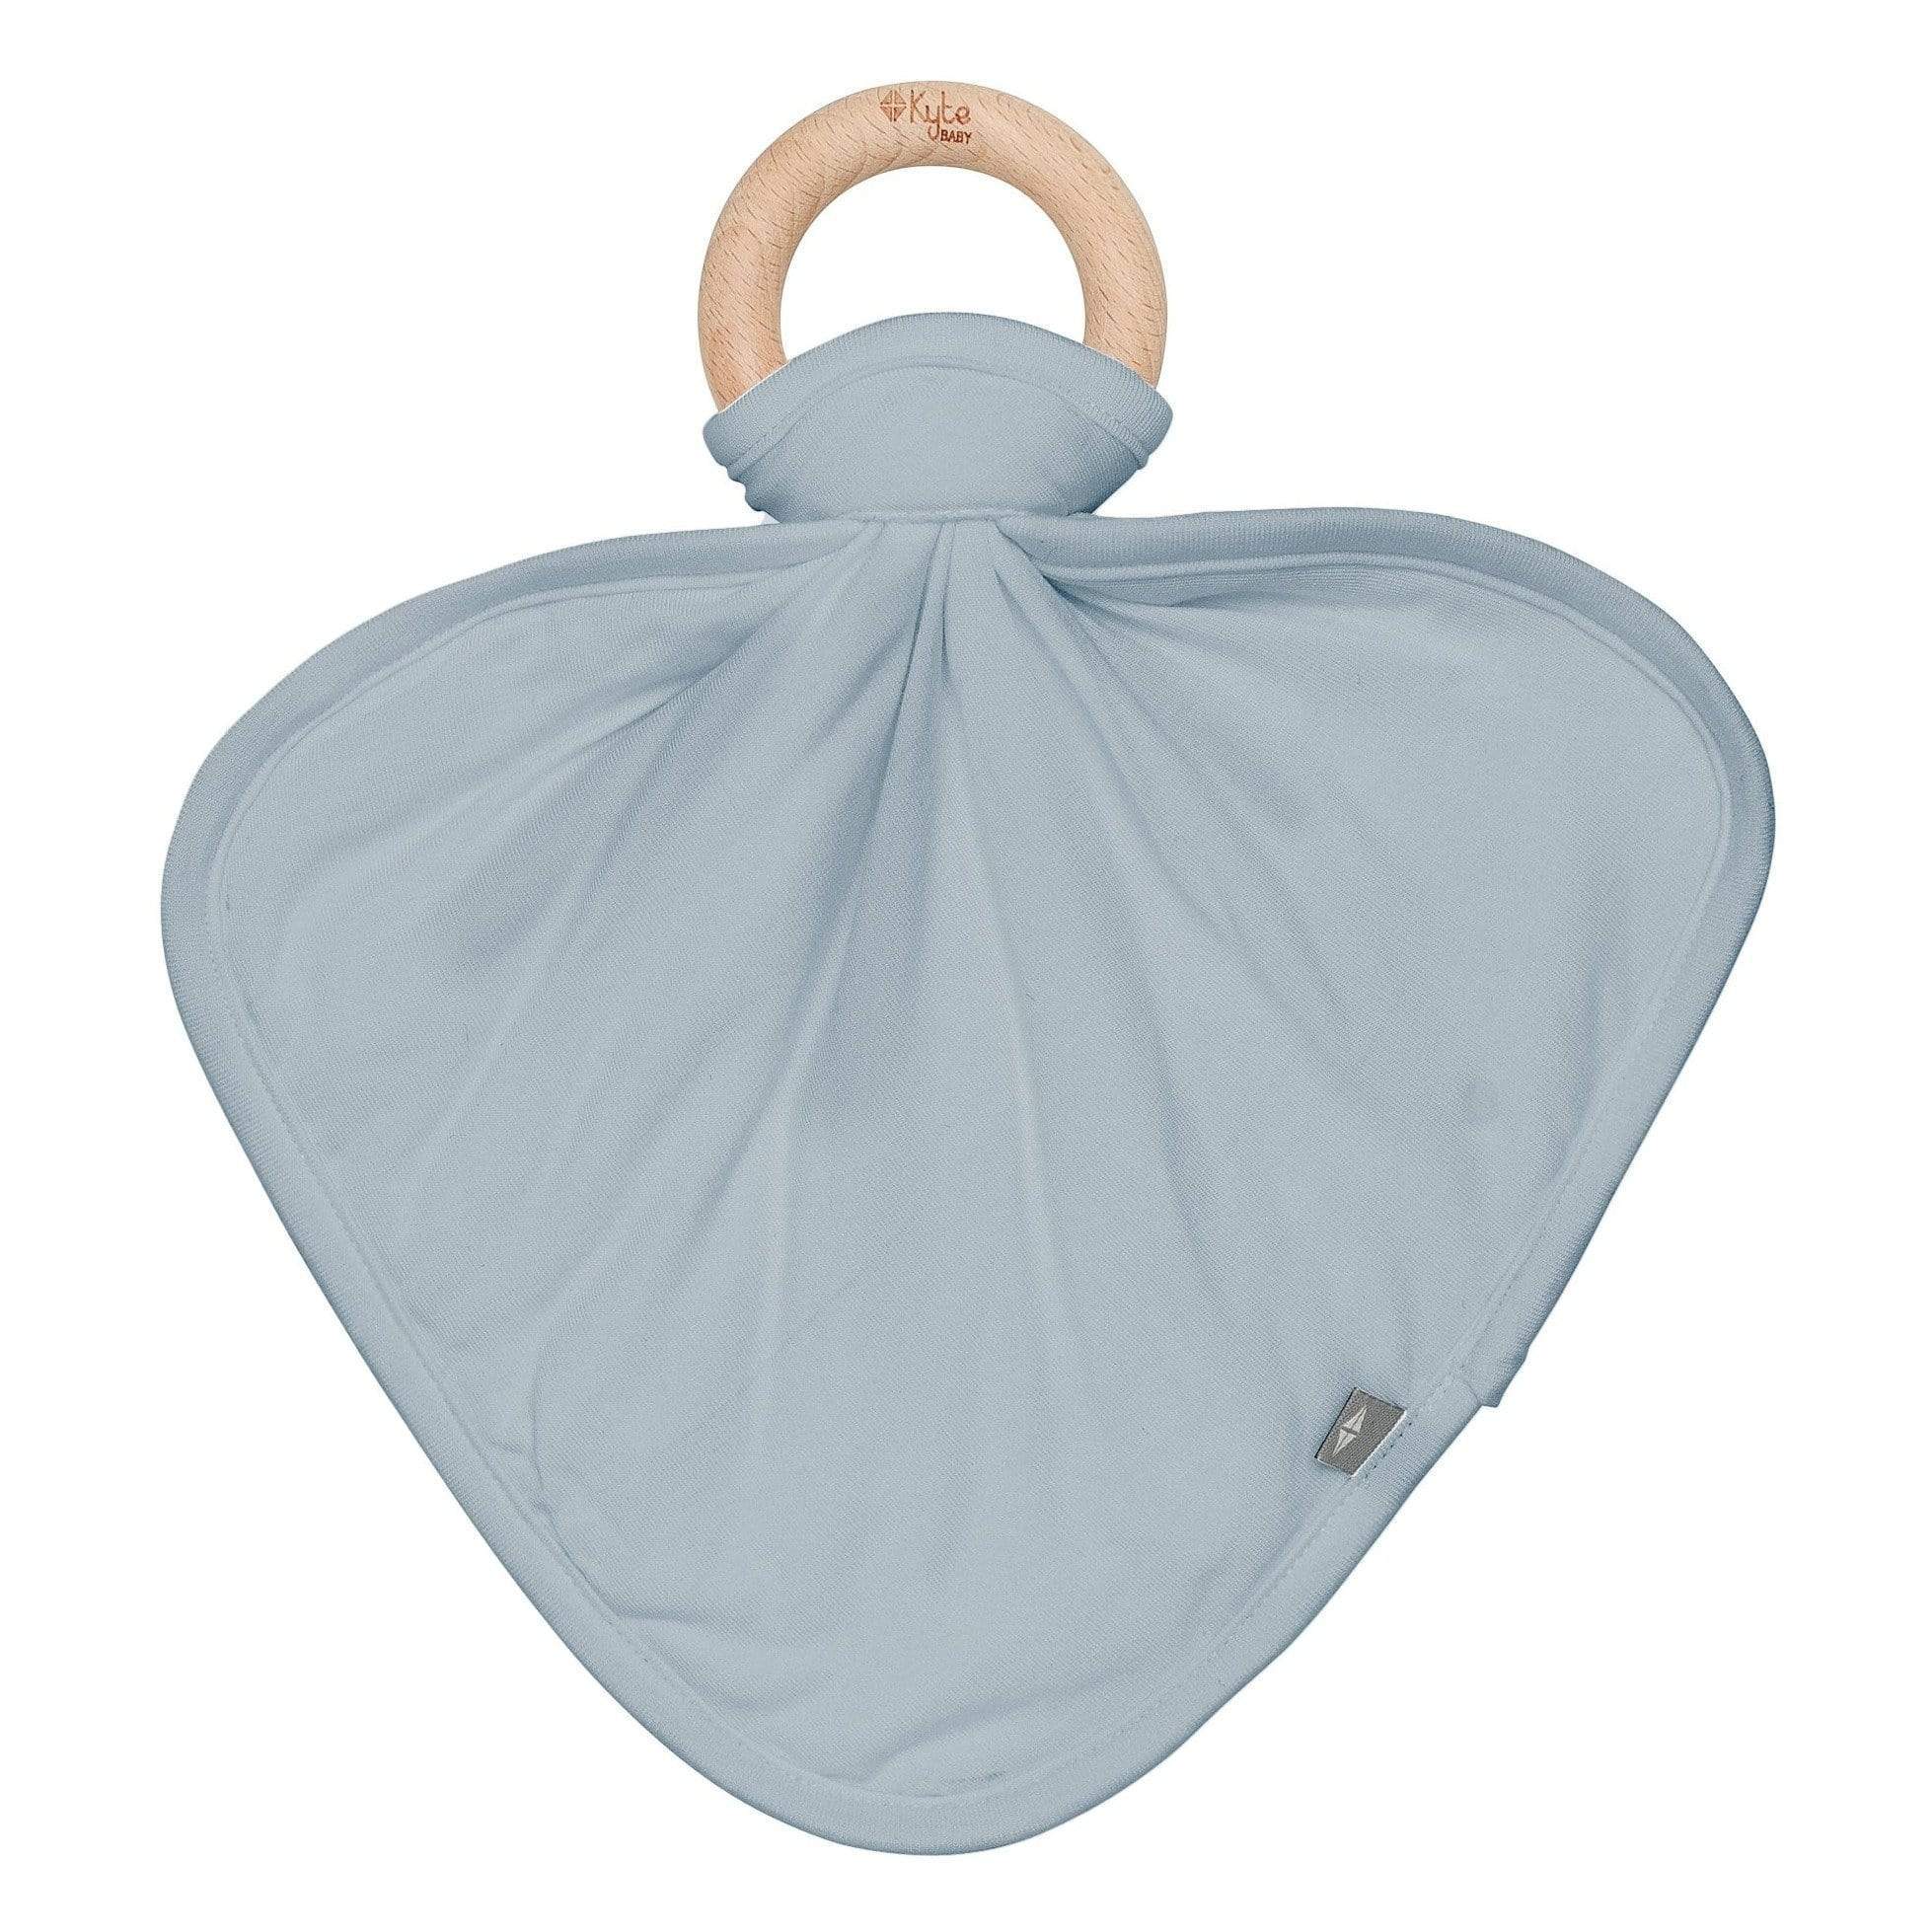 Kyte BABY Lovey Fog / Infant Lovey in Fog with Removable Teething Ring